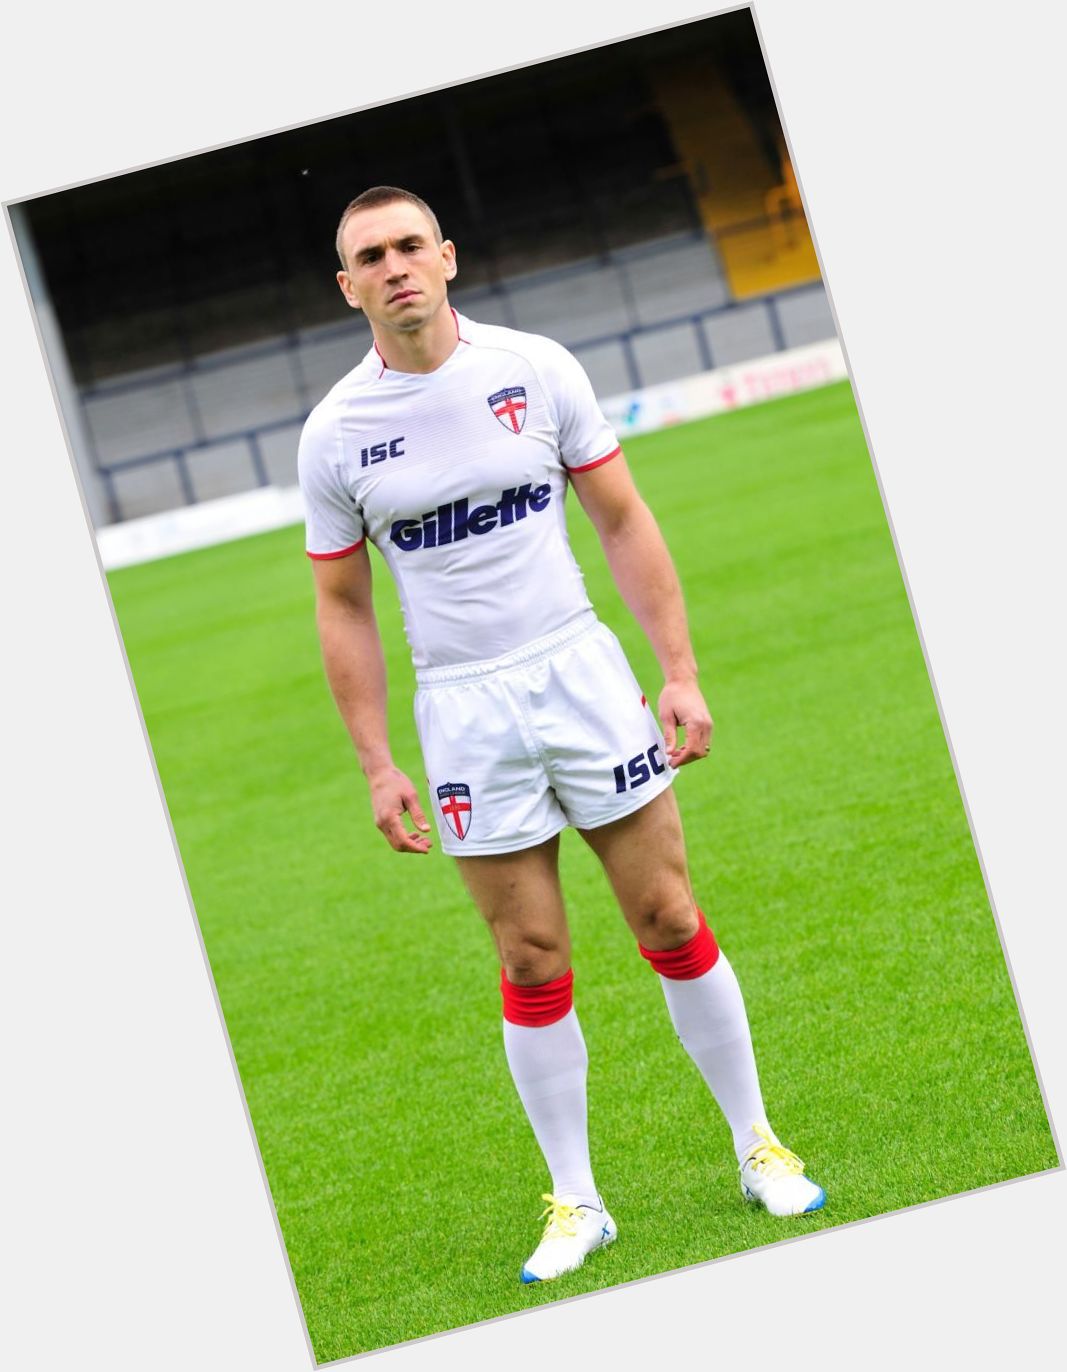 Kevin Sinfield dating 2